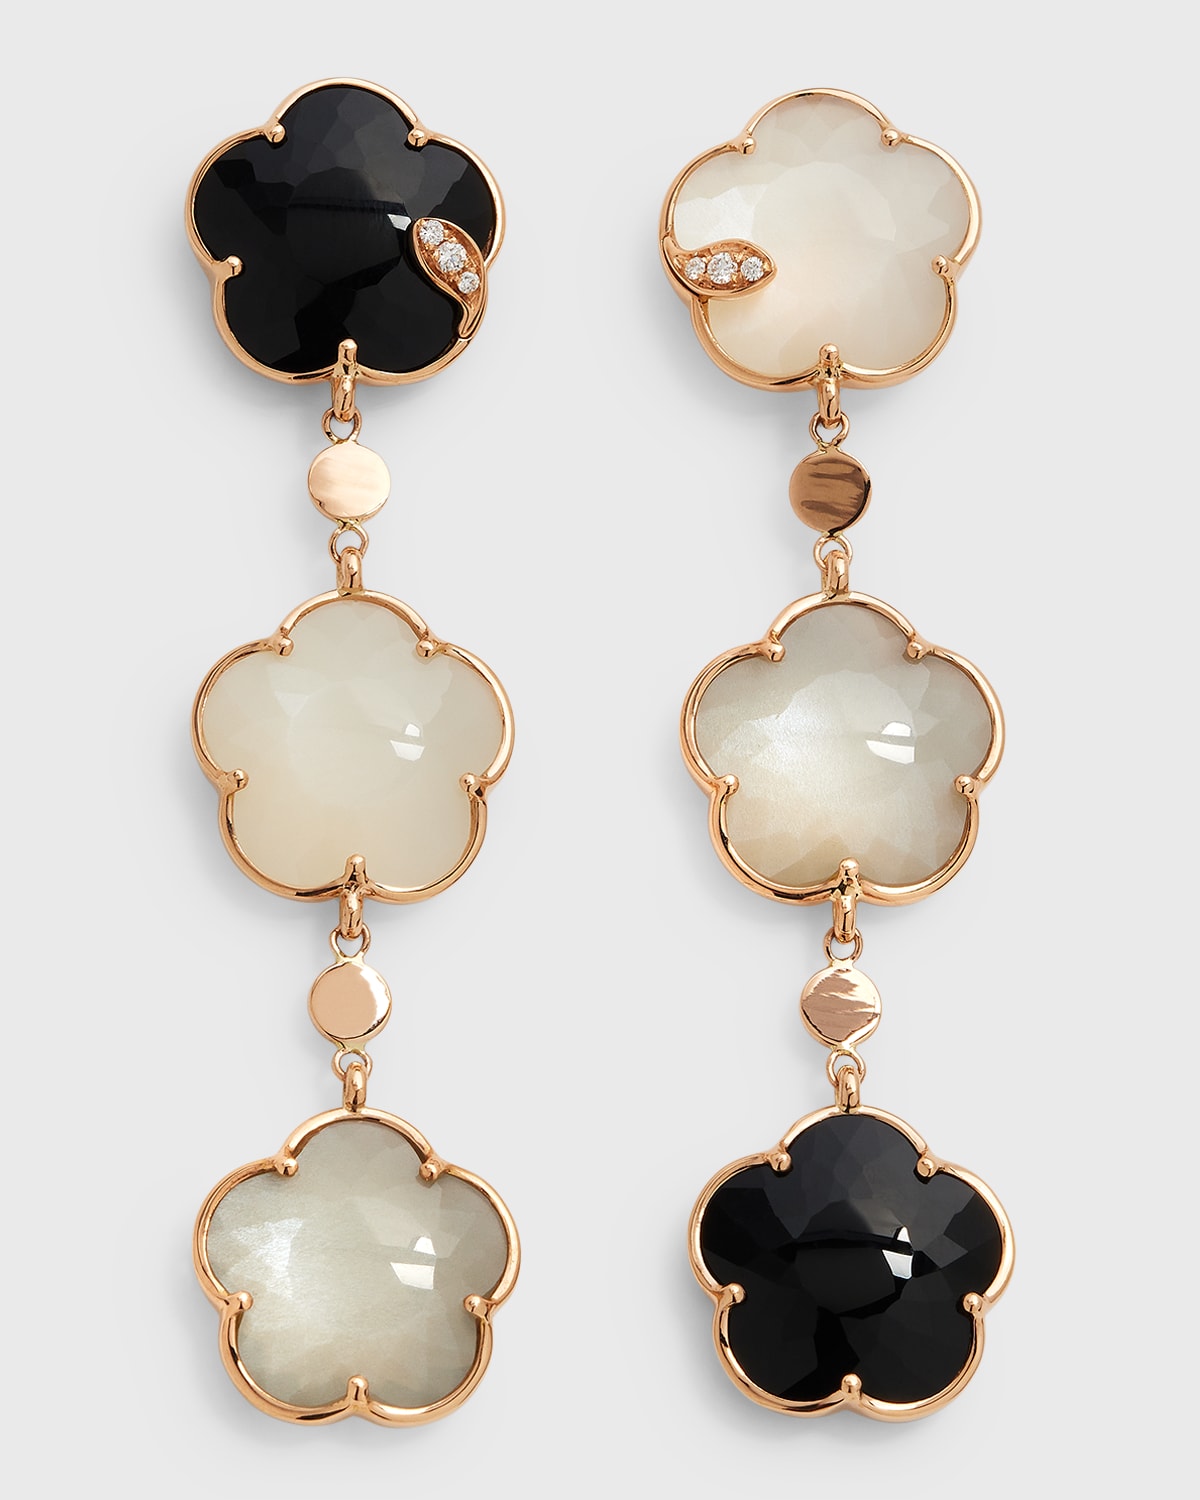 Bouquet Lunaire Chandelier Earrings in 18k Rose Gold with Grey and White Moonstone, Onyx and White Diamonds